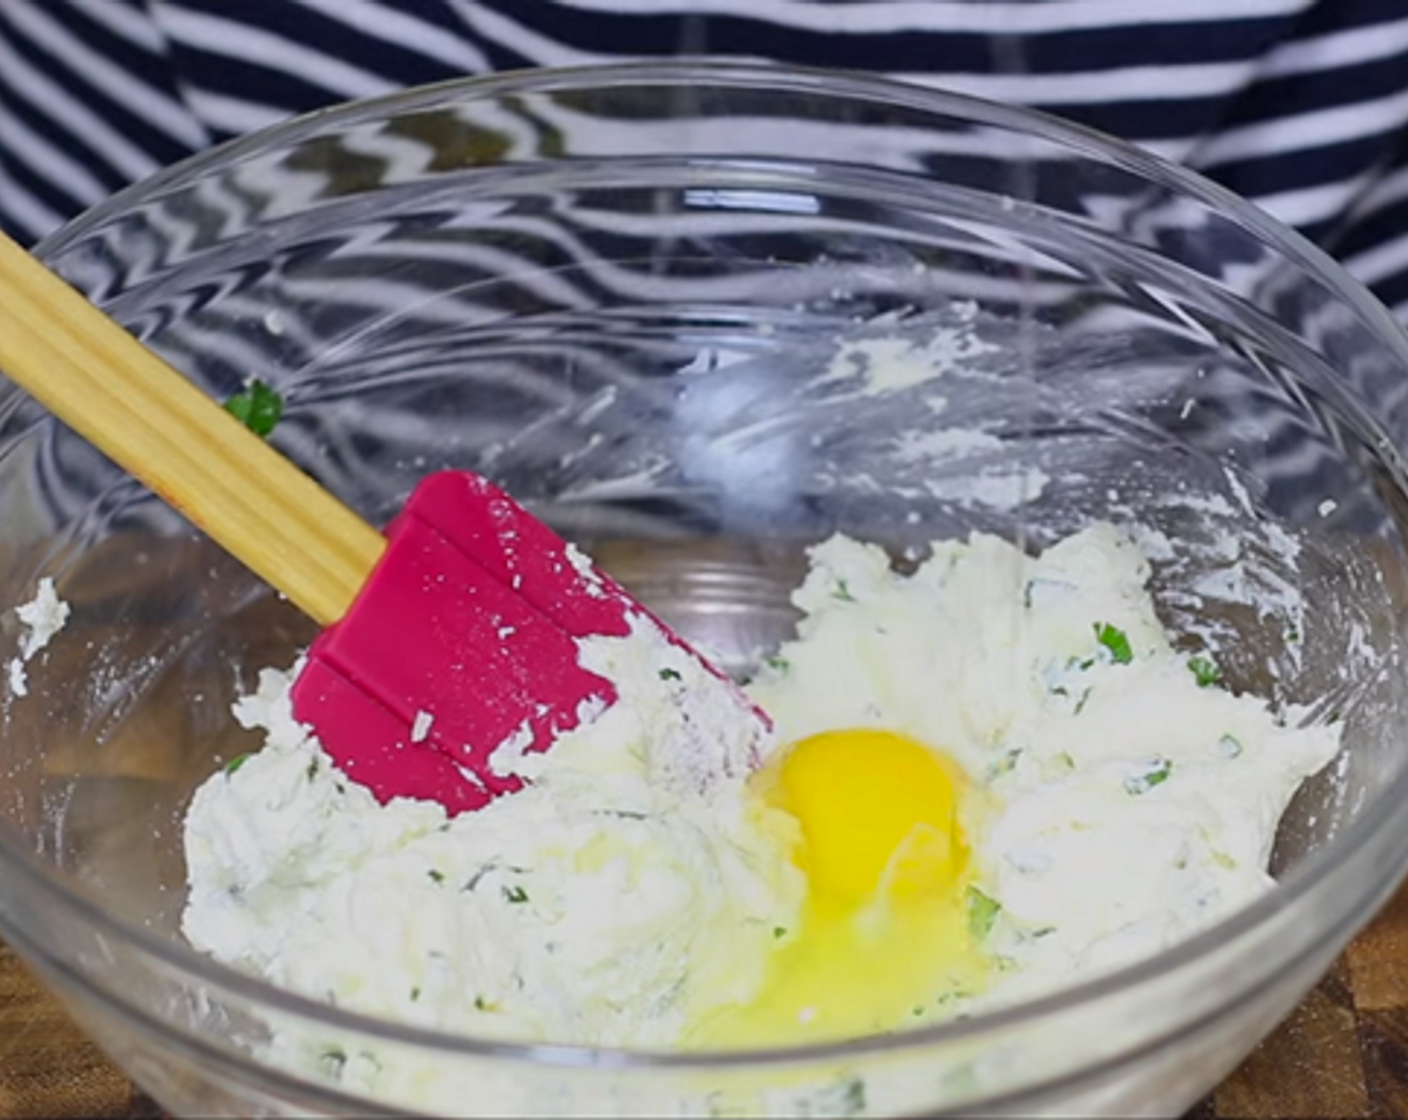 step 3 In a large bowl, combine Ricotta Cheese (1 3/4 cups), Parmesan Cheese (1/2 cup), Fresh Parsley (1 Tbsp), Shredded Mozzarella Cheese (1/2 cup), Salt (to taste), Ground Black Pepper (to taste), and Egg (1). Mix until well blended.